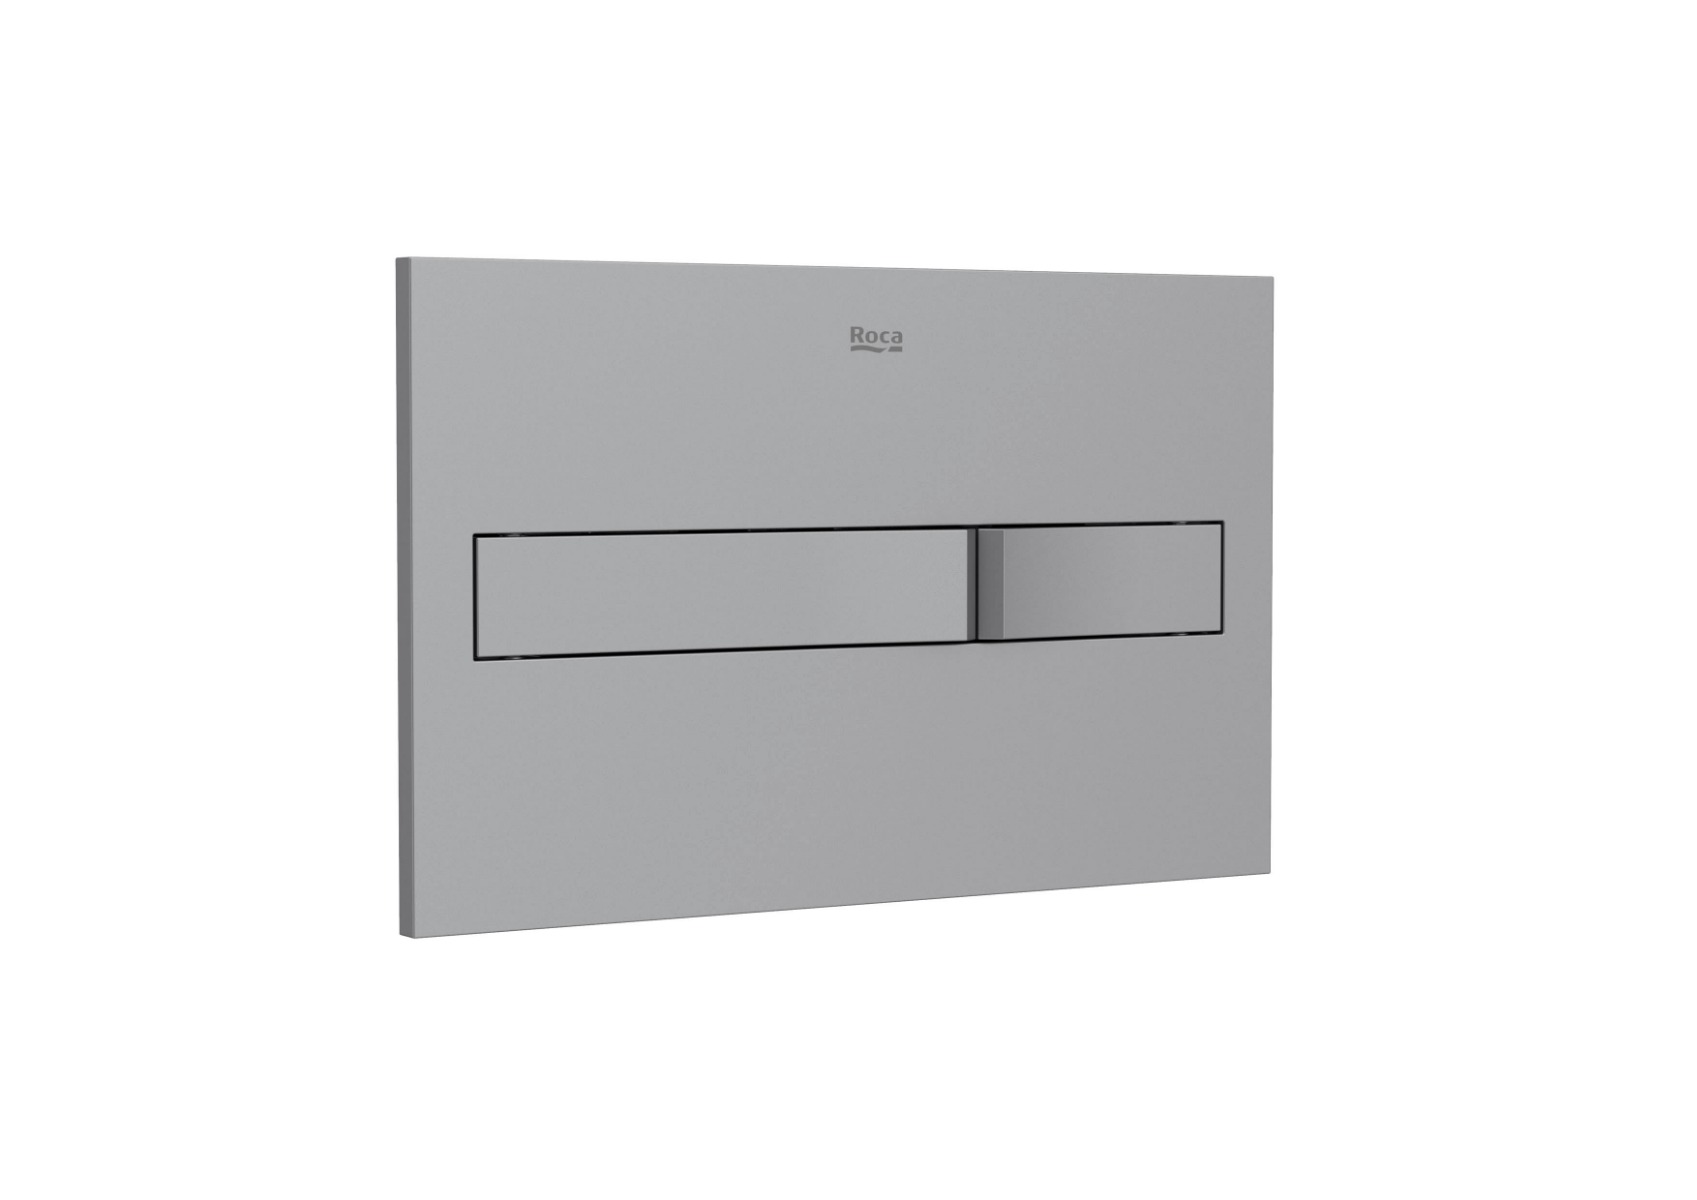 PL2 DUAL - Dual flush operating plate for concealed cistern grey lacquer